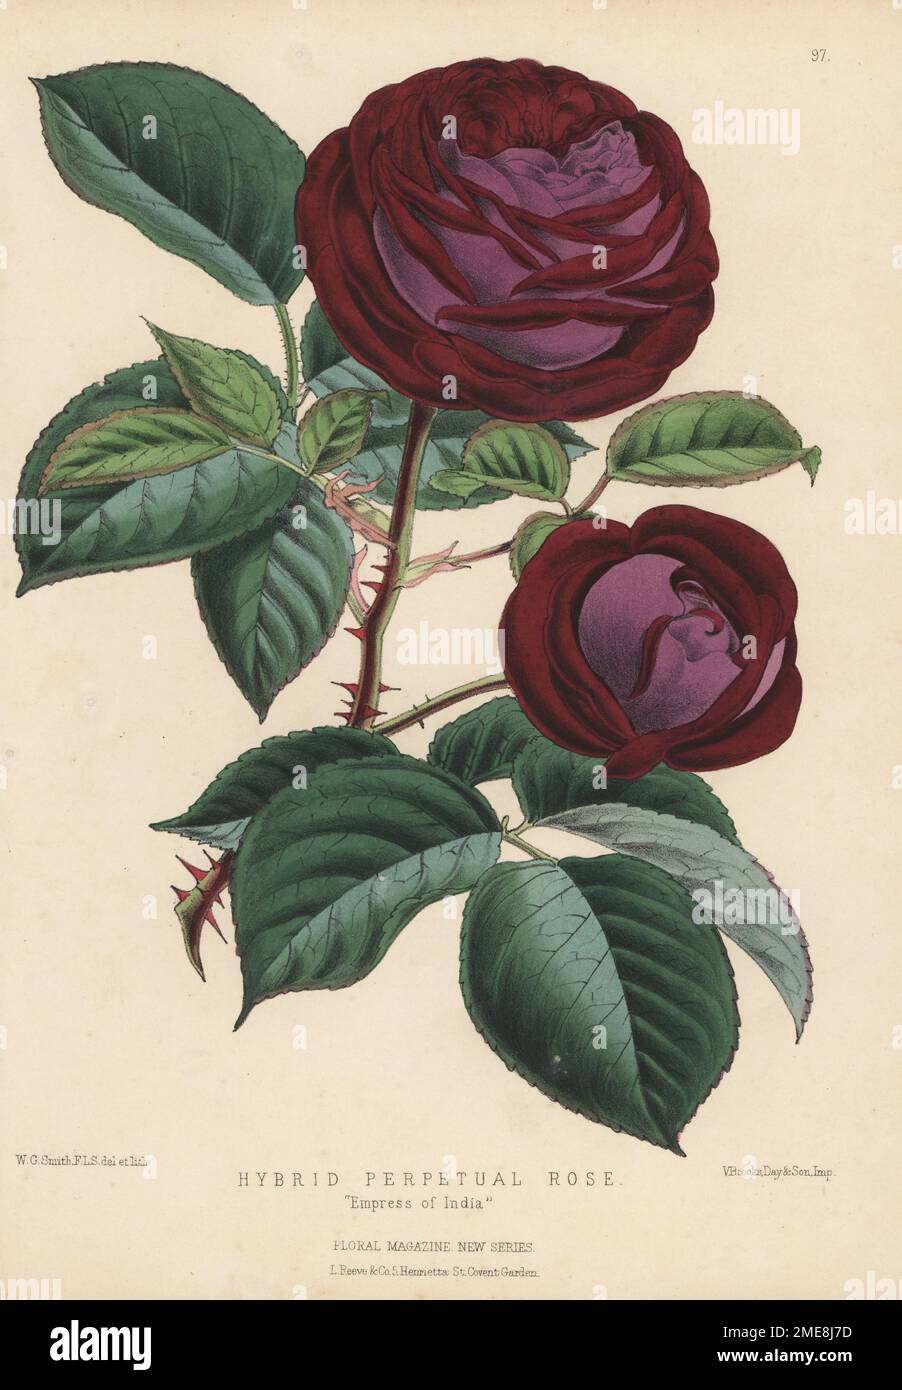 Hybrid perpetual rose, Empress of India. New crimson rose cultivar sold by William Paul and Sons nursery of Cheshunt. Handcolored botanical illustration drawn and lithographed by Worthington George Smith from Henry Honywood Dombrain's Floral Magazine, New Series, Volume 3, L. Reeve, London, 1874. Lithograph printed  by Vincent Brooks, Day & Son. Stock Photo